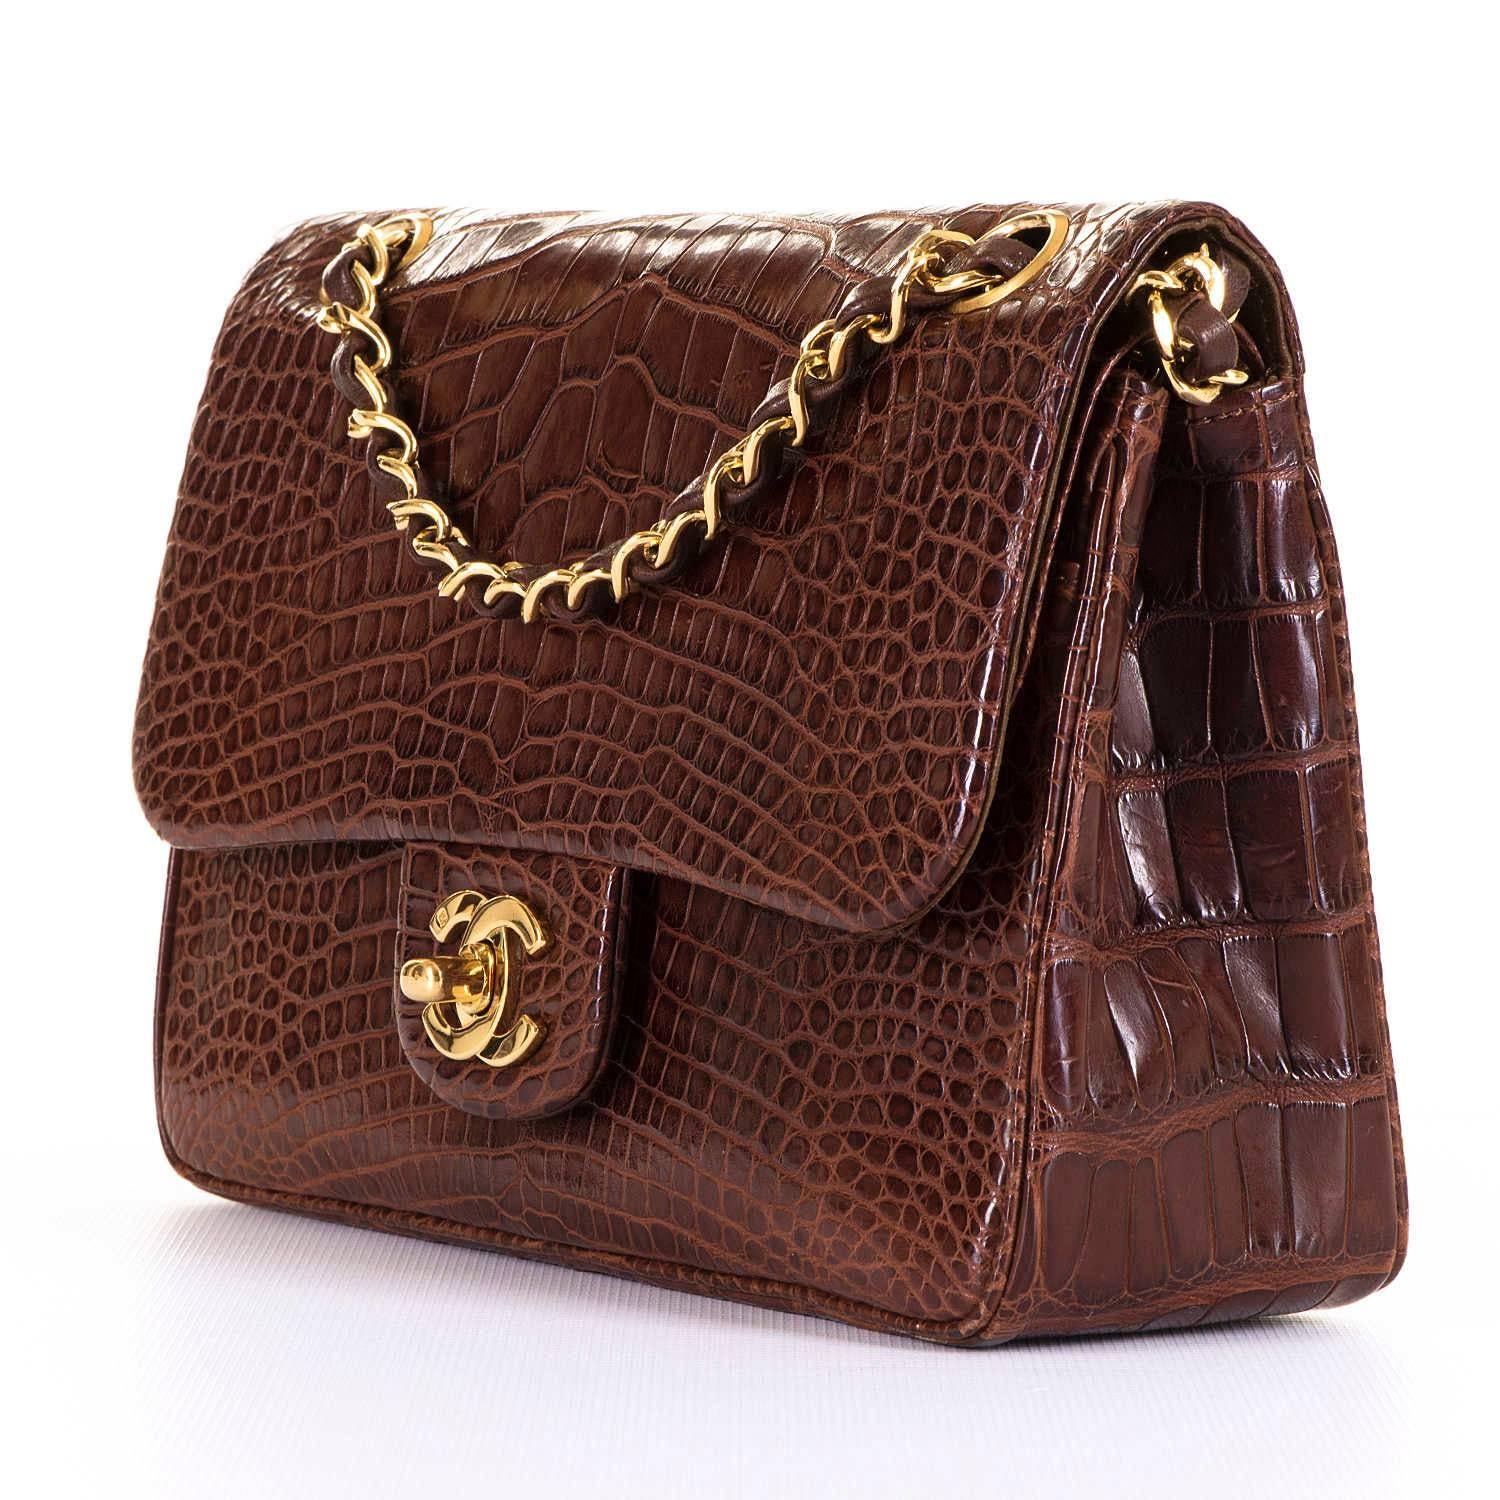 Black WOW! Chanel 23cm Double Flap 'Sac Timeless' in Cognac Crocodile & Gold Hardware